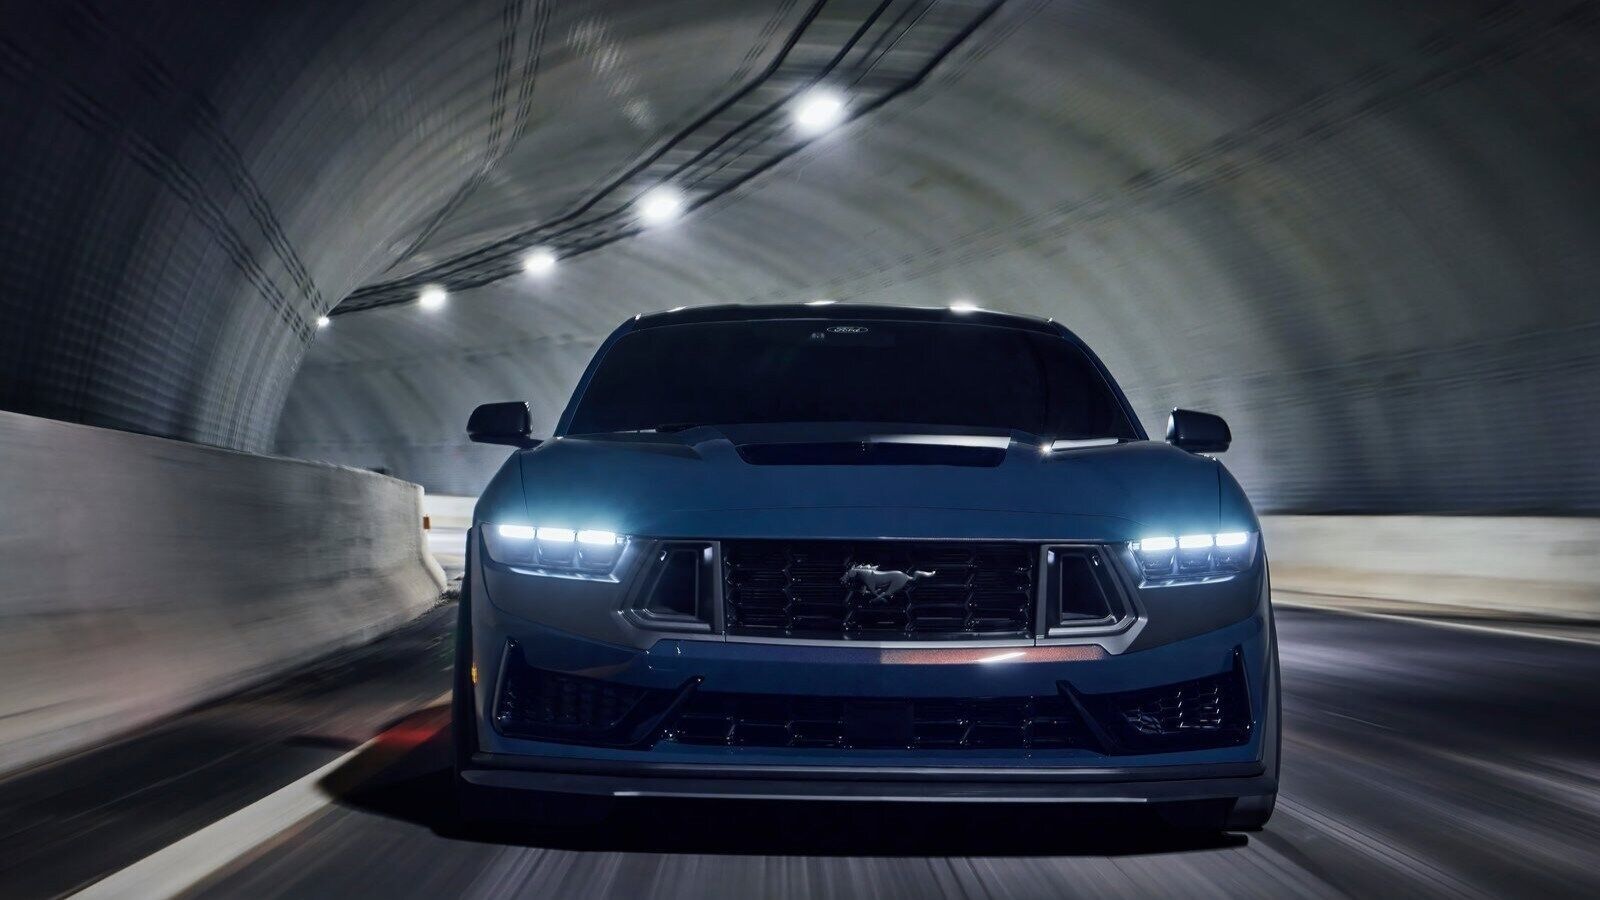 In pics: 2023 Ford Mustang Dark Horse is the new breed of iconic muscle car